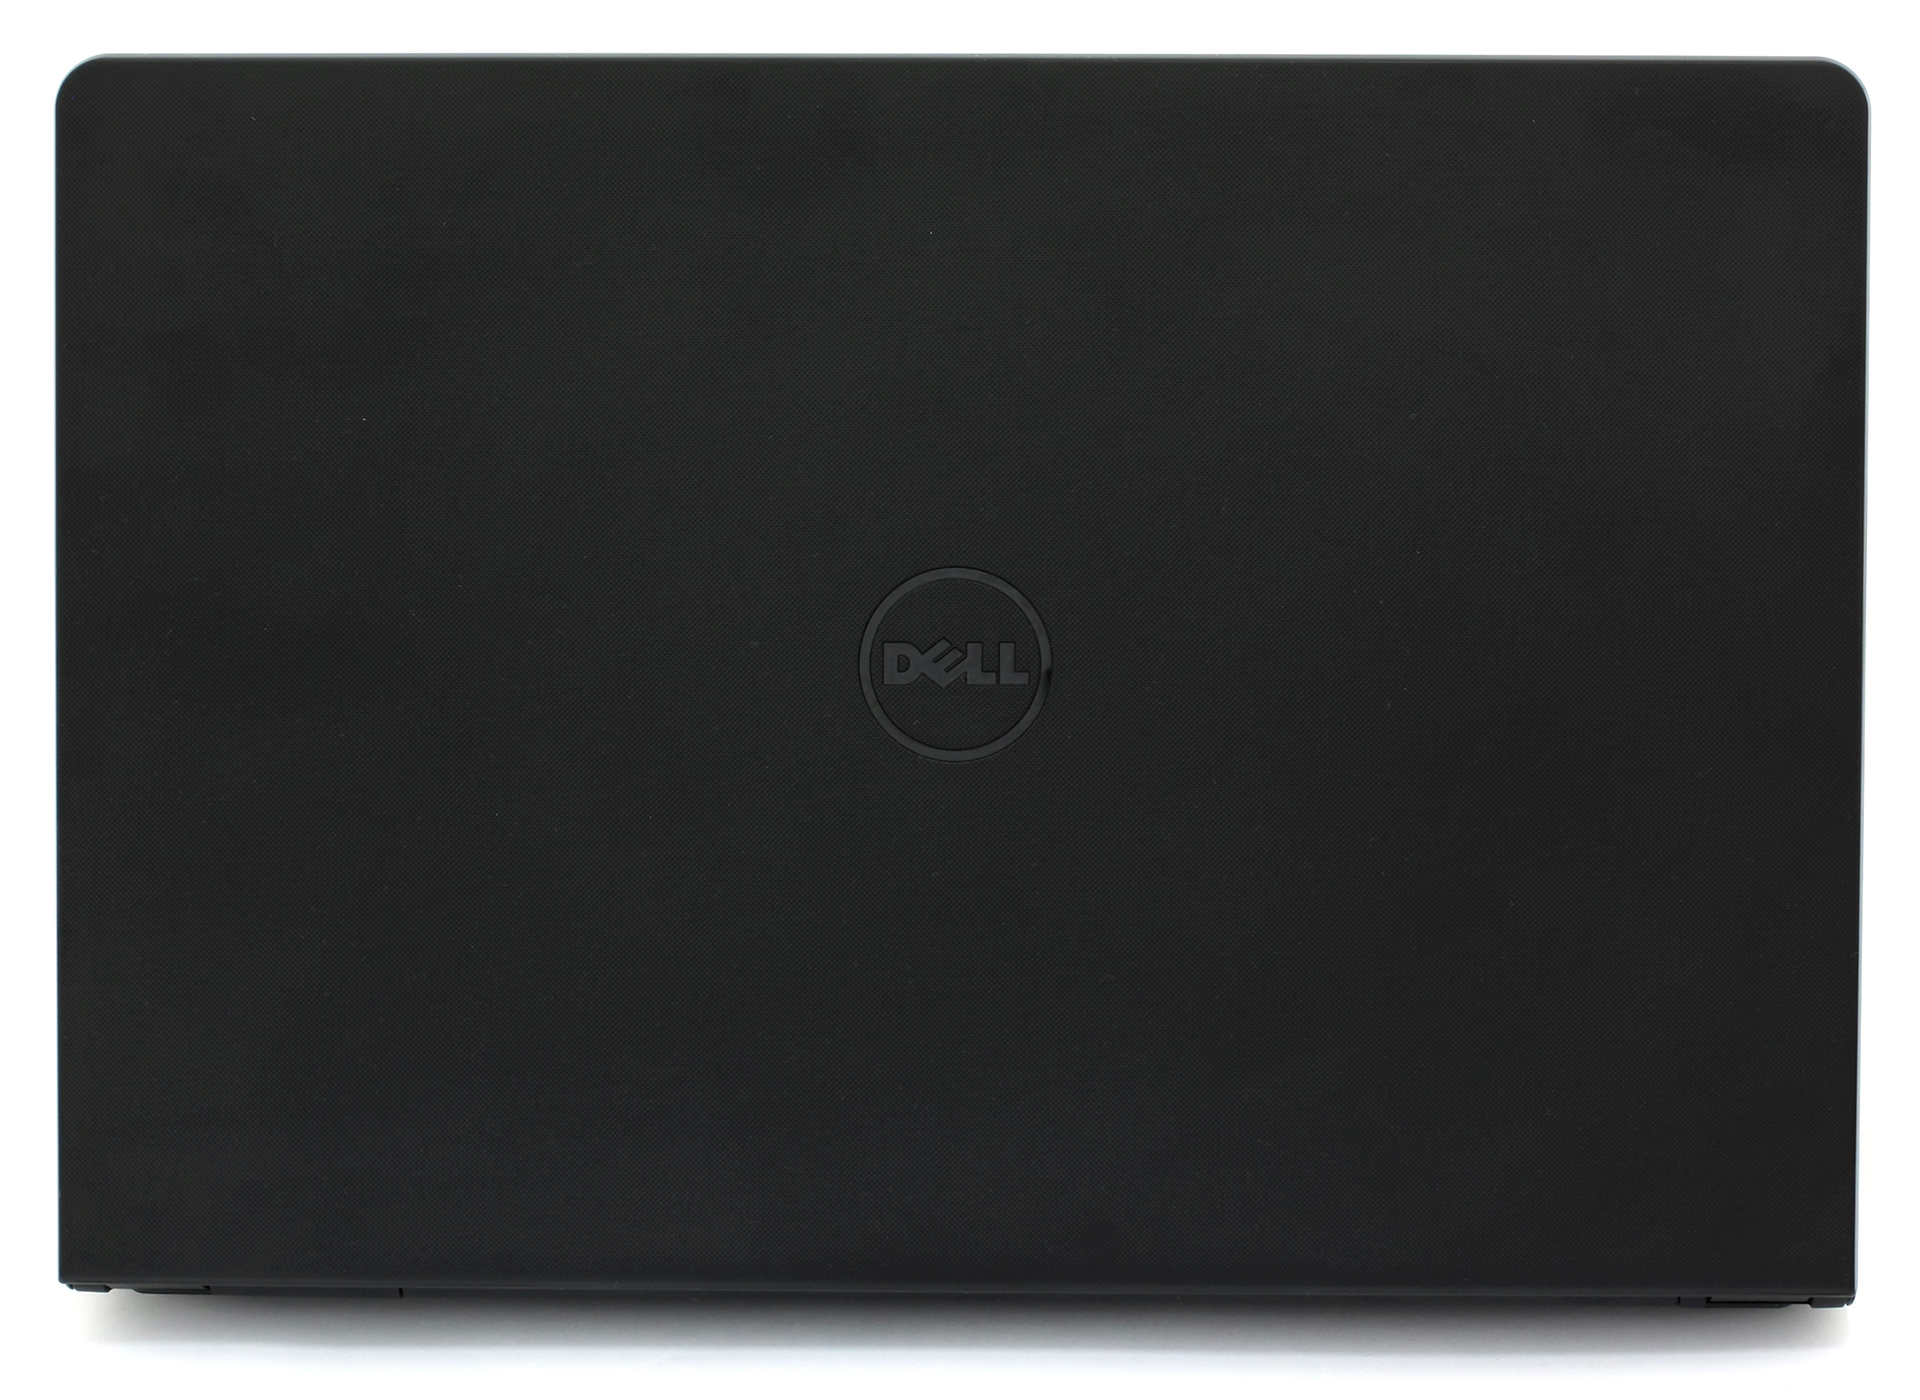 Dell Inspiron 15 3552 review - a solid low-end performer | LaptopMedia.com